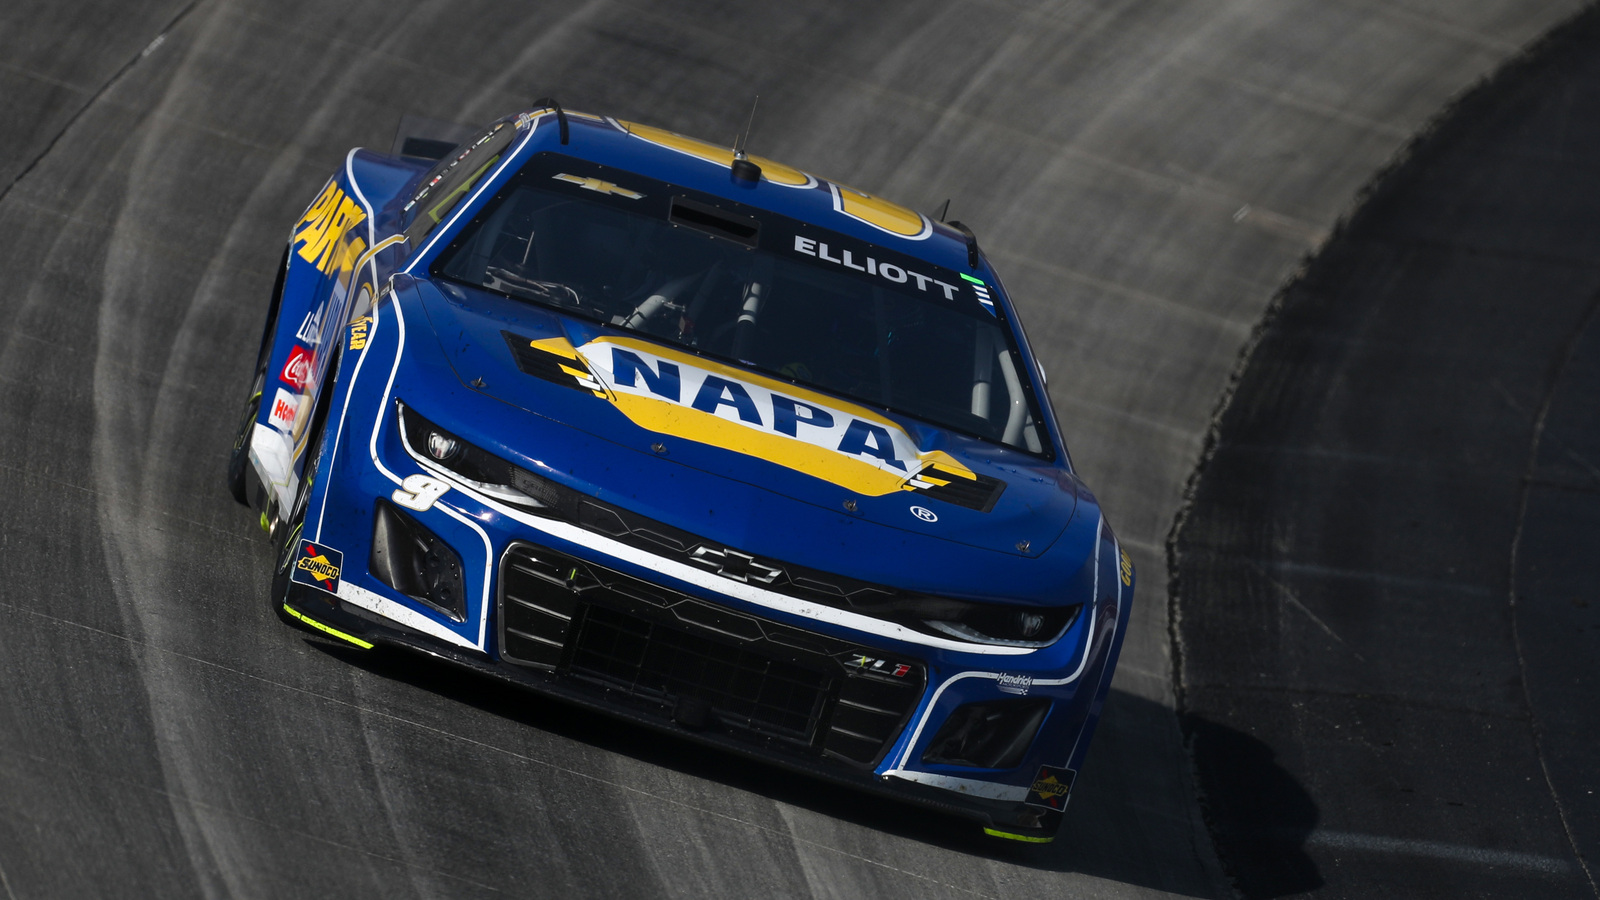 Chase Elliott promises 'surely bring home another checkered flag' after Kansas photo-finish for P3